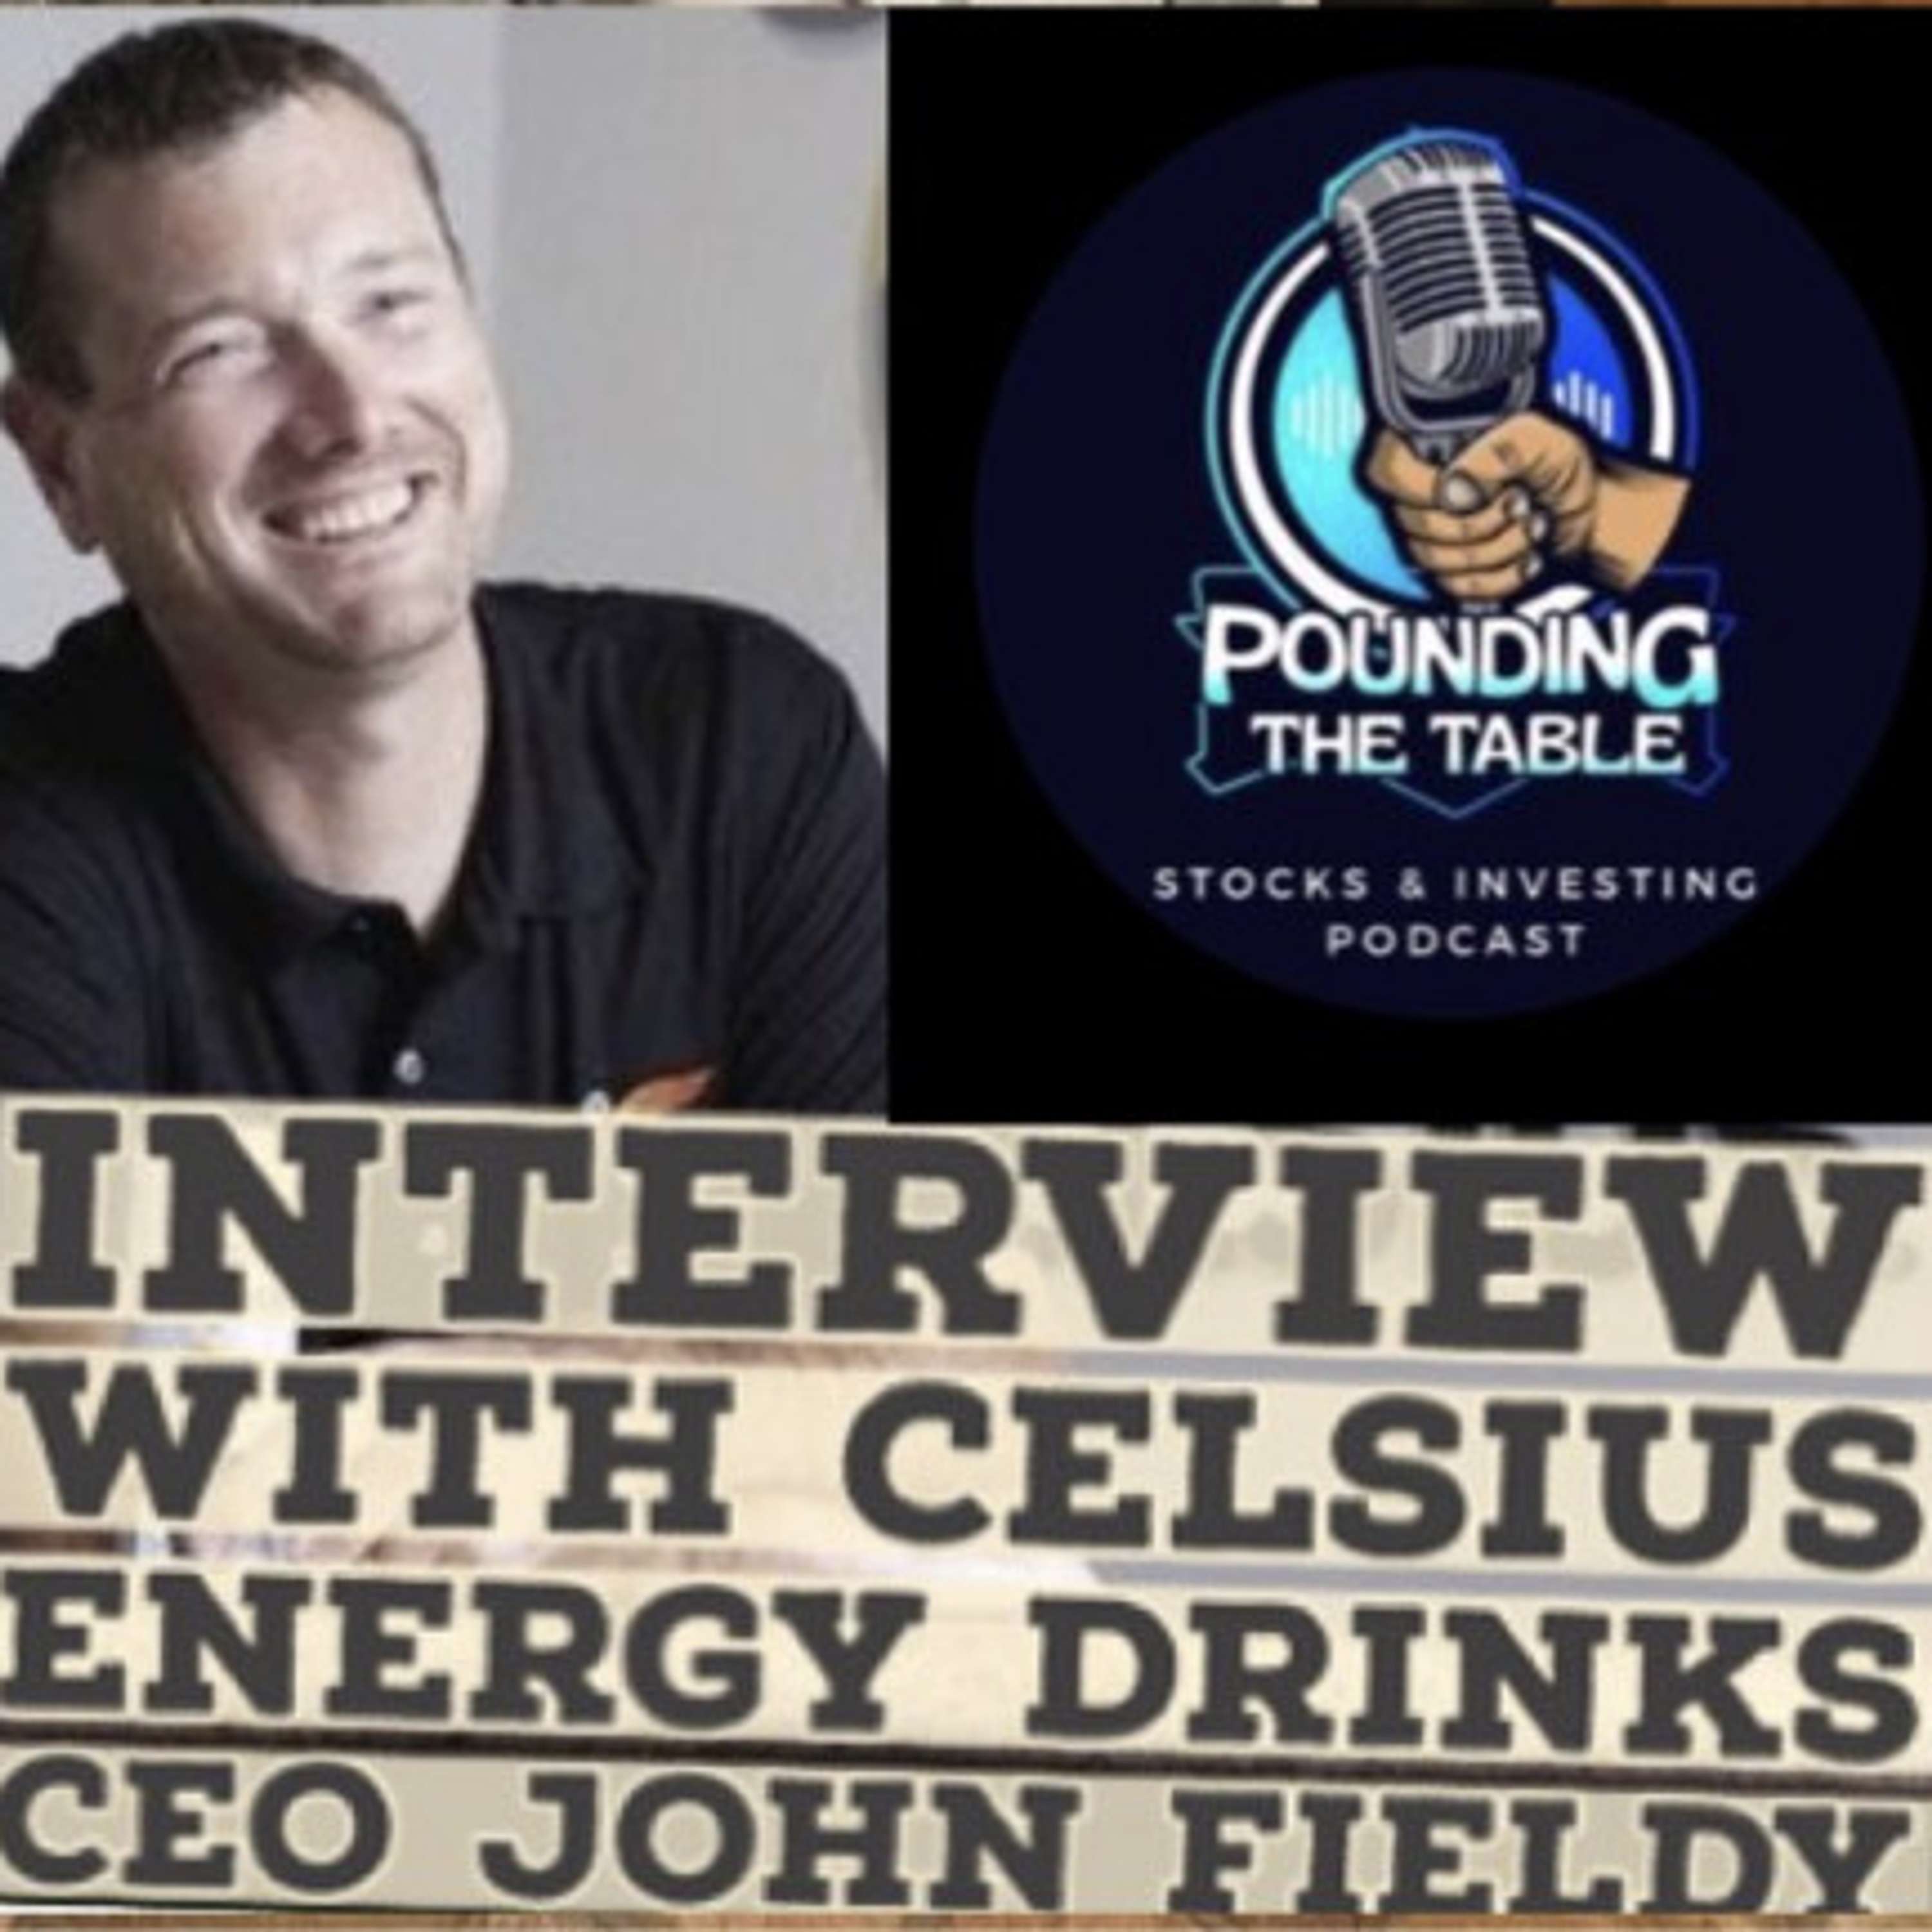 #89: Interview w/ CEO of Celsius Energy Drinks John Fieldly